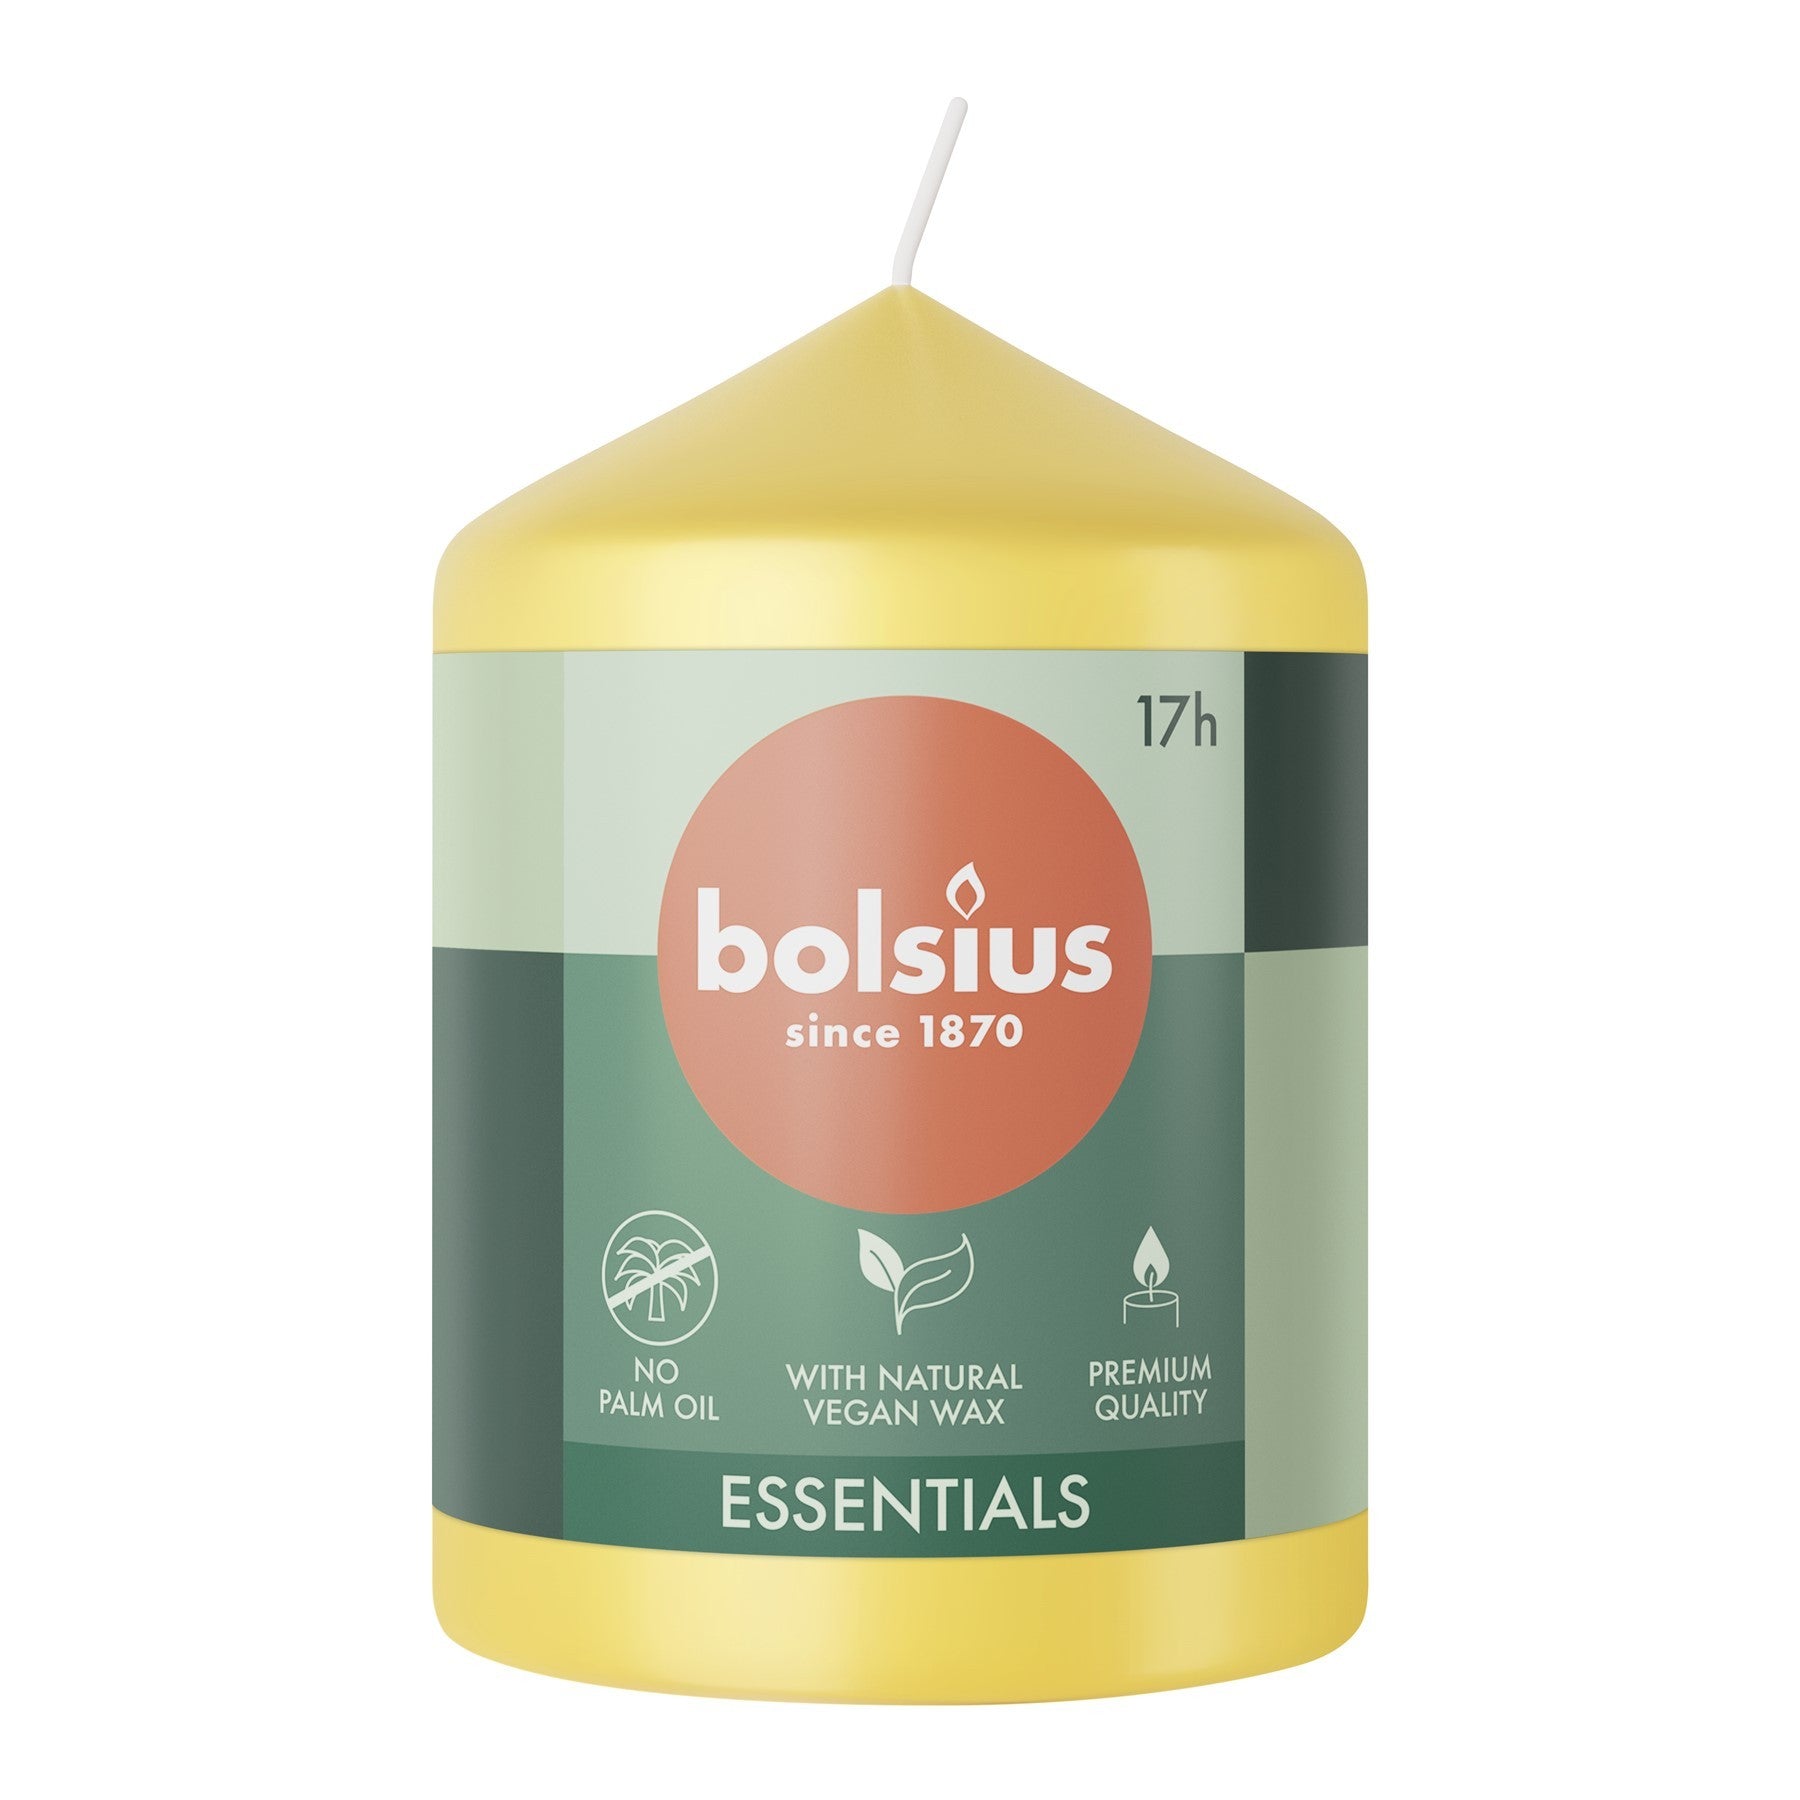 View Bolsius Sunny Yellow Essential Pillar Candle 80mm x 58mm information